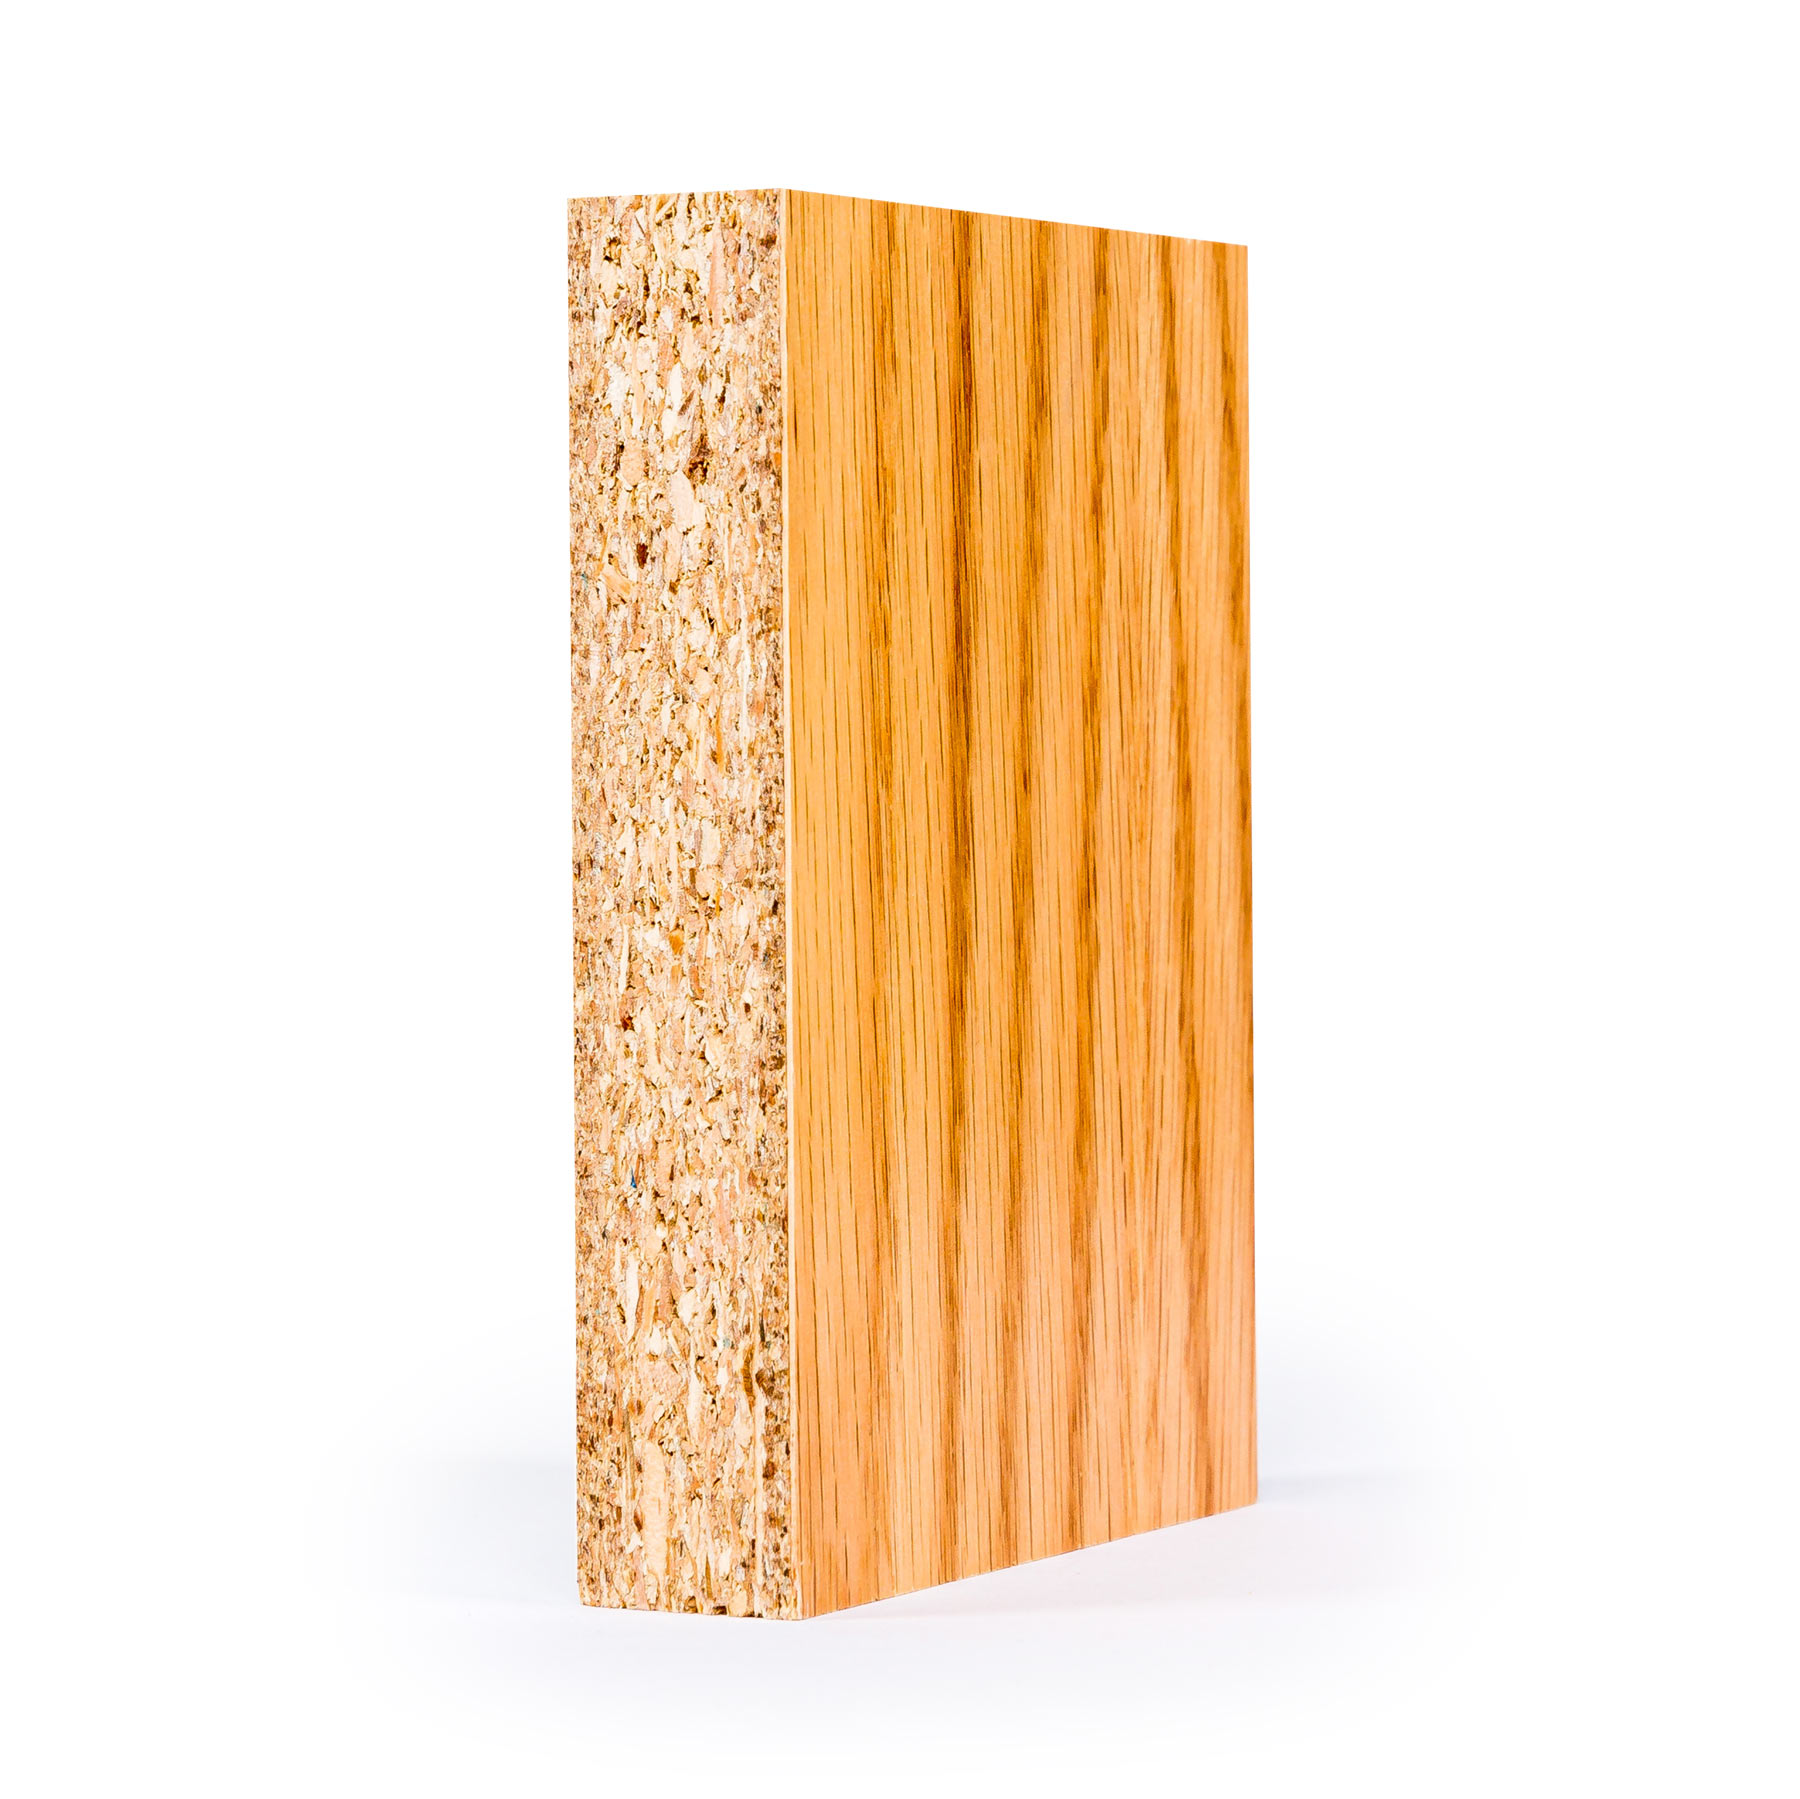 Particleboard, Boise Blend, Particleboard Manufacturer